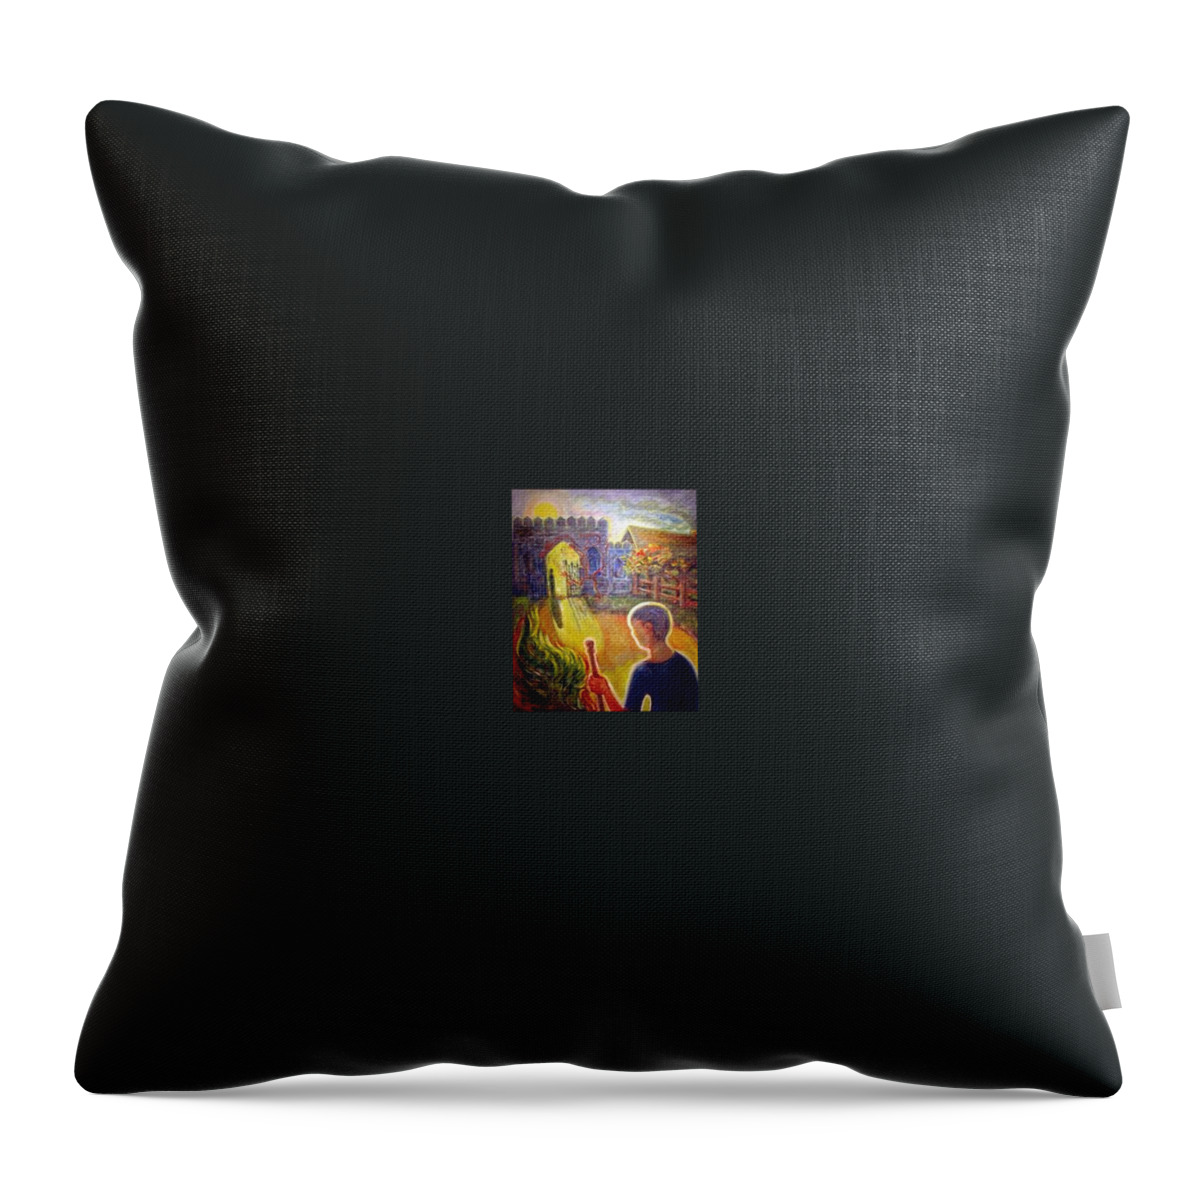  Throw Pillow featuring the painting The Western Gate by Stephen Hawks